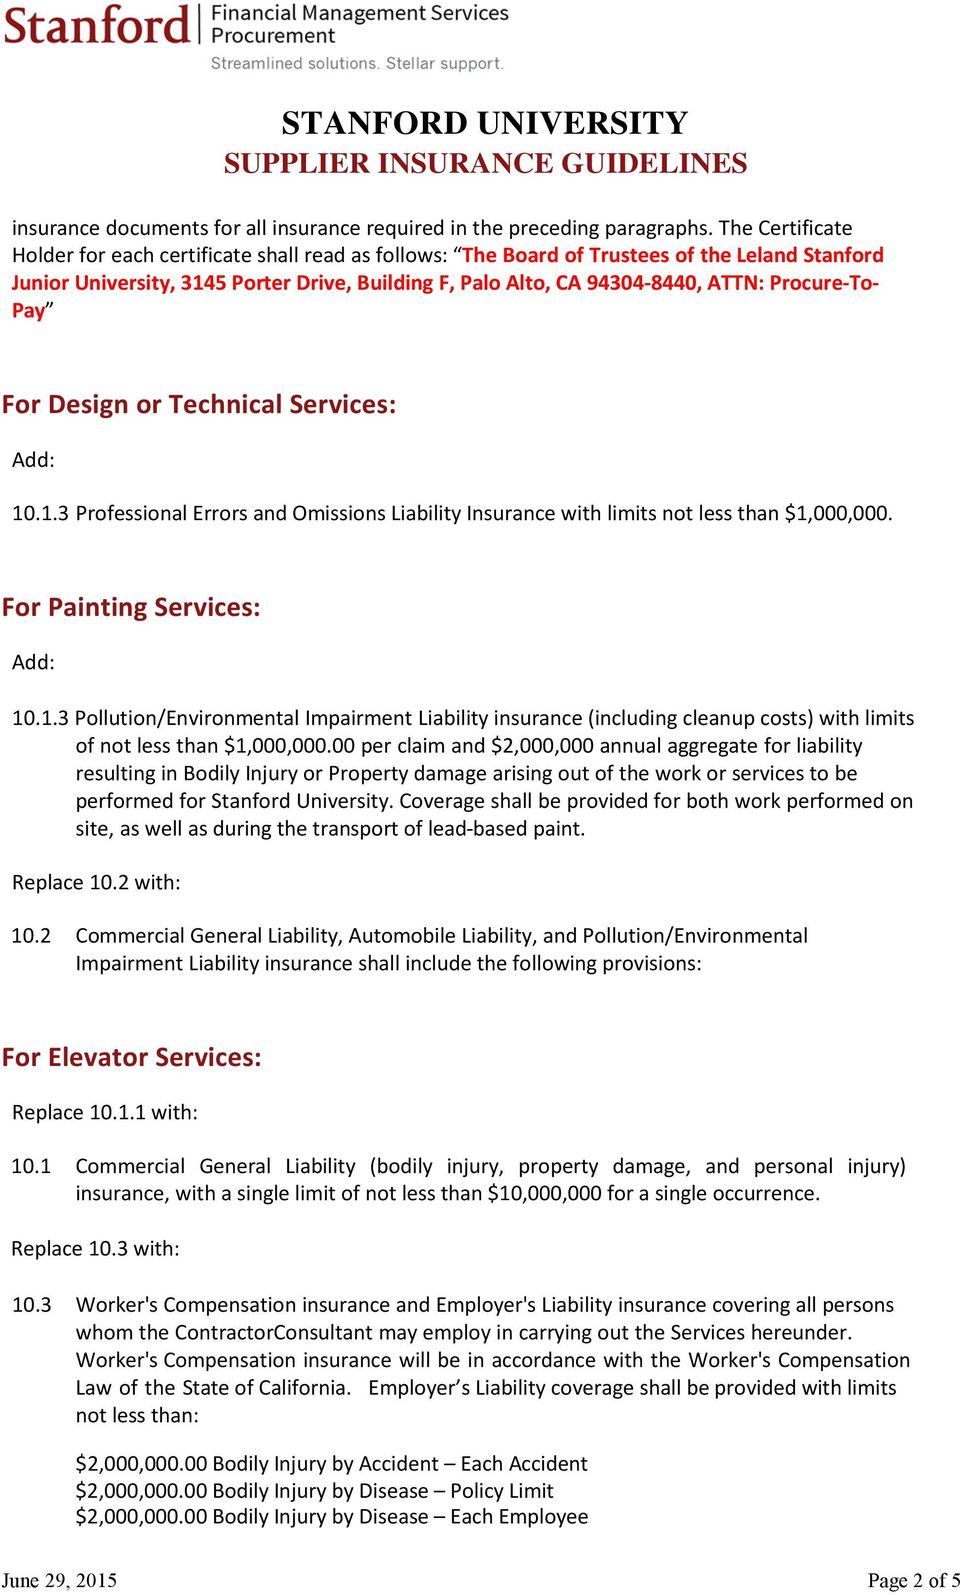 Procure-To- Pay For Design or Technical Services: 10.1.3 Professional Errors and Omissions Liability Insurance with limits not less than $1,000,000. For Painting Services: 10.1.3 Pollution/Environmental Impairment Liability insurance (including cleanup costs) with limits of not less than $1,000,000.